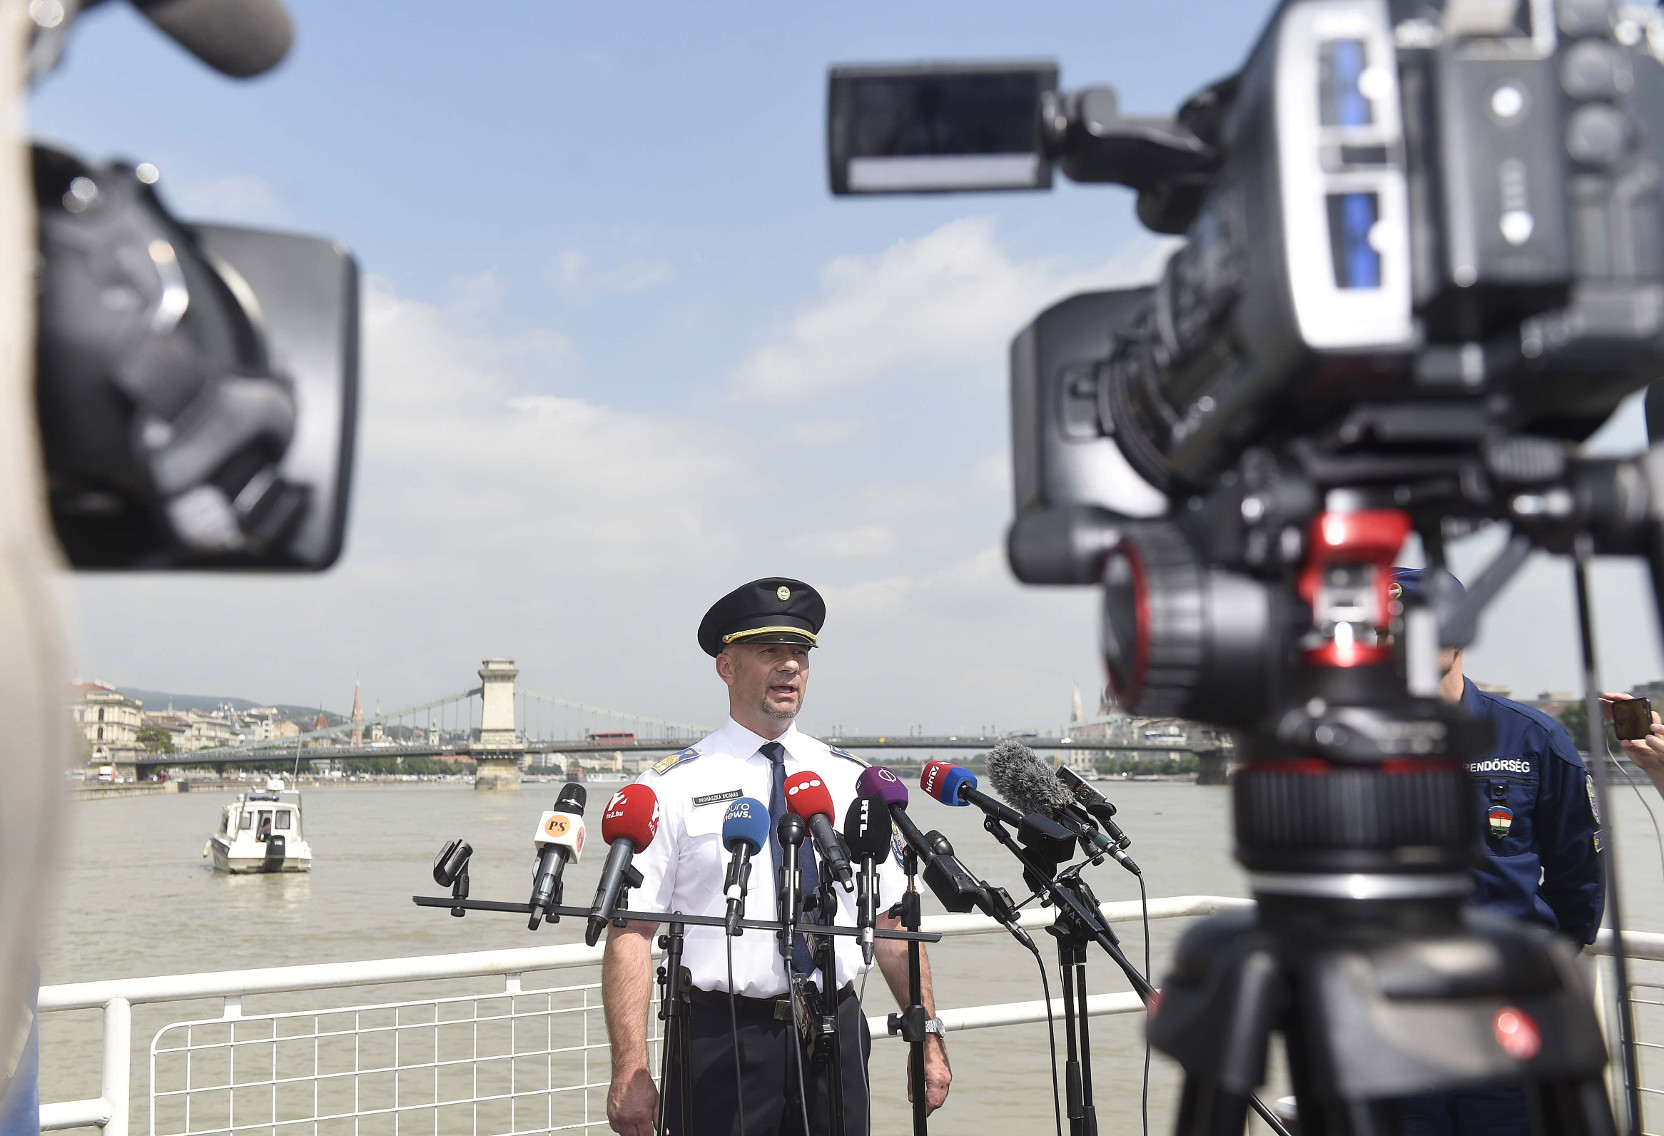 Video: Police Reveal Details Of Investigation Into Danube Boat Tragedy